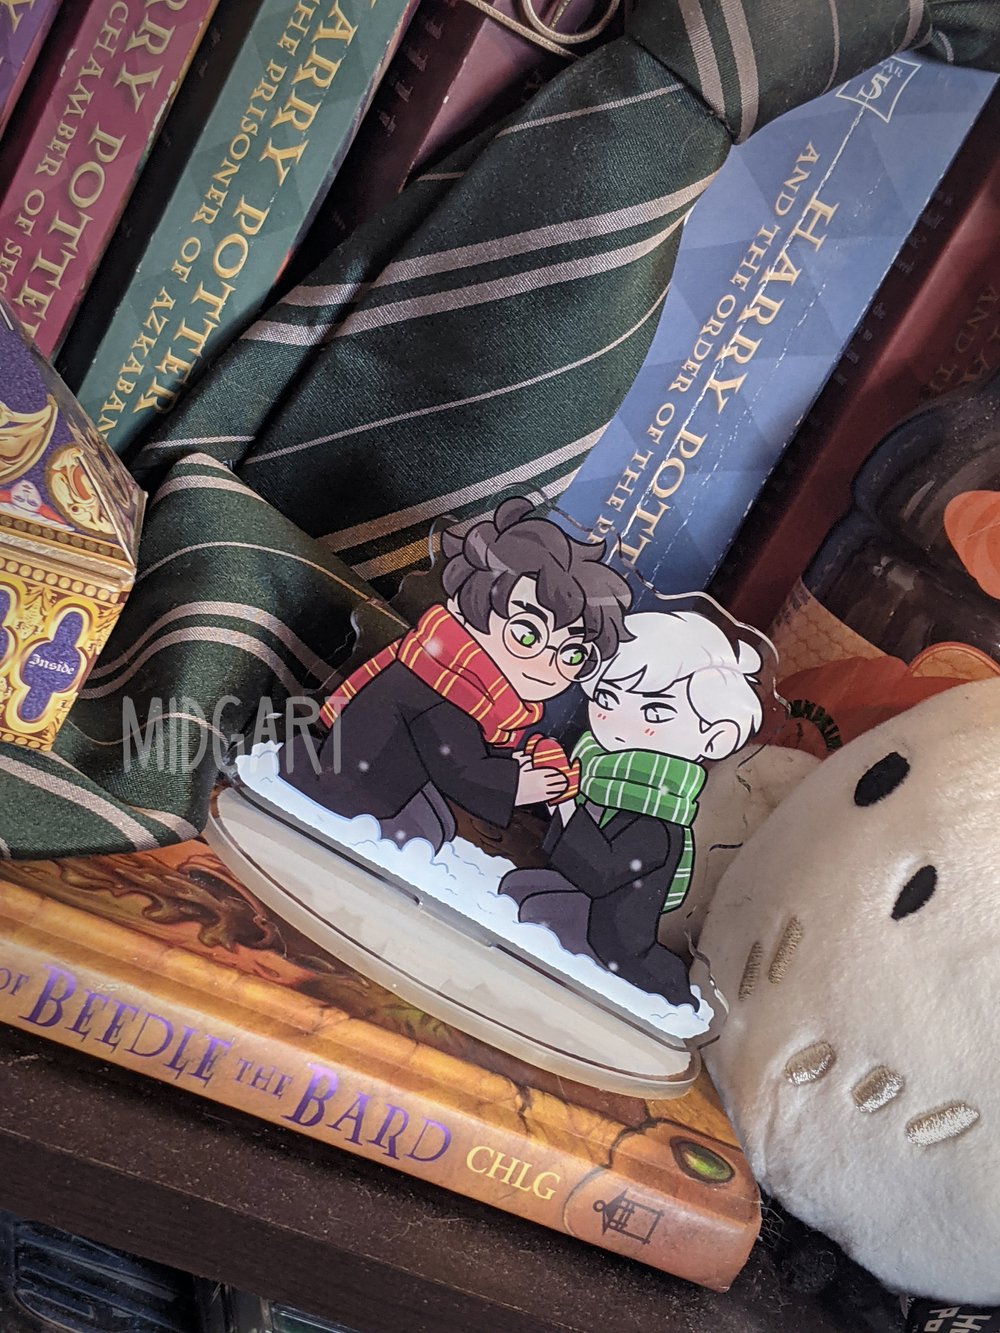 Drarry Standee